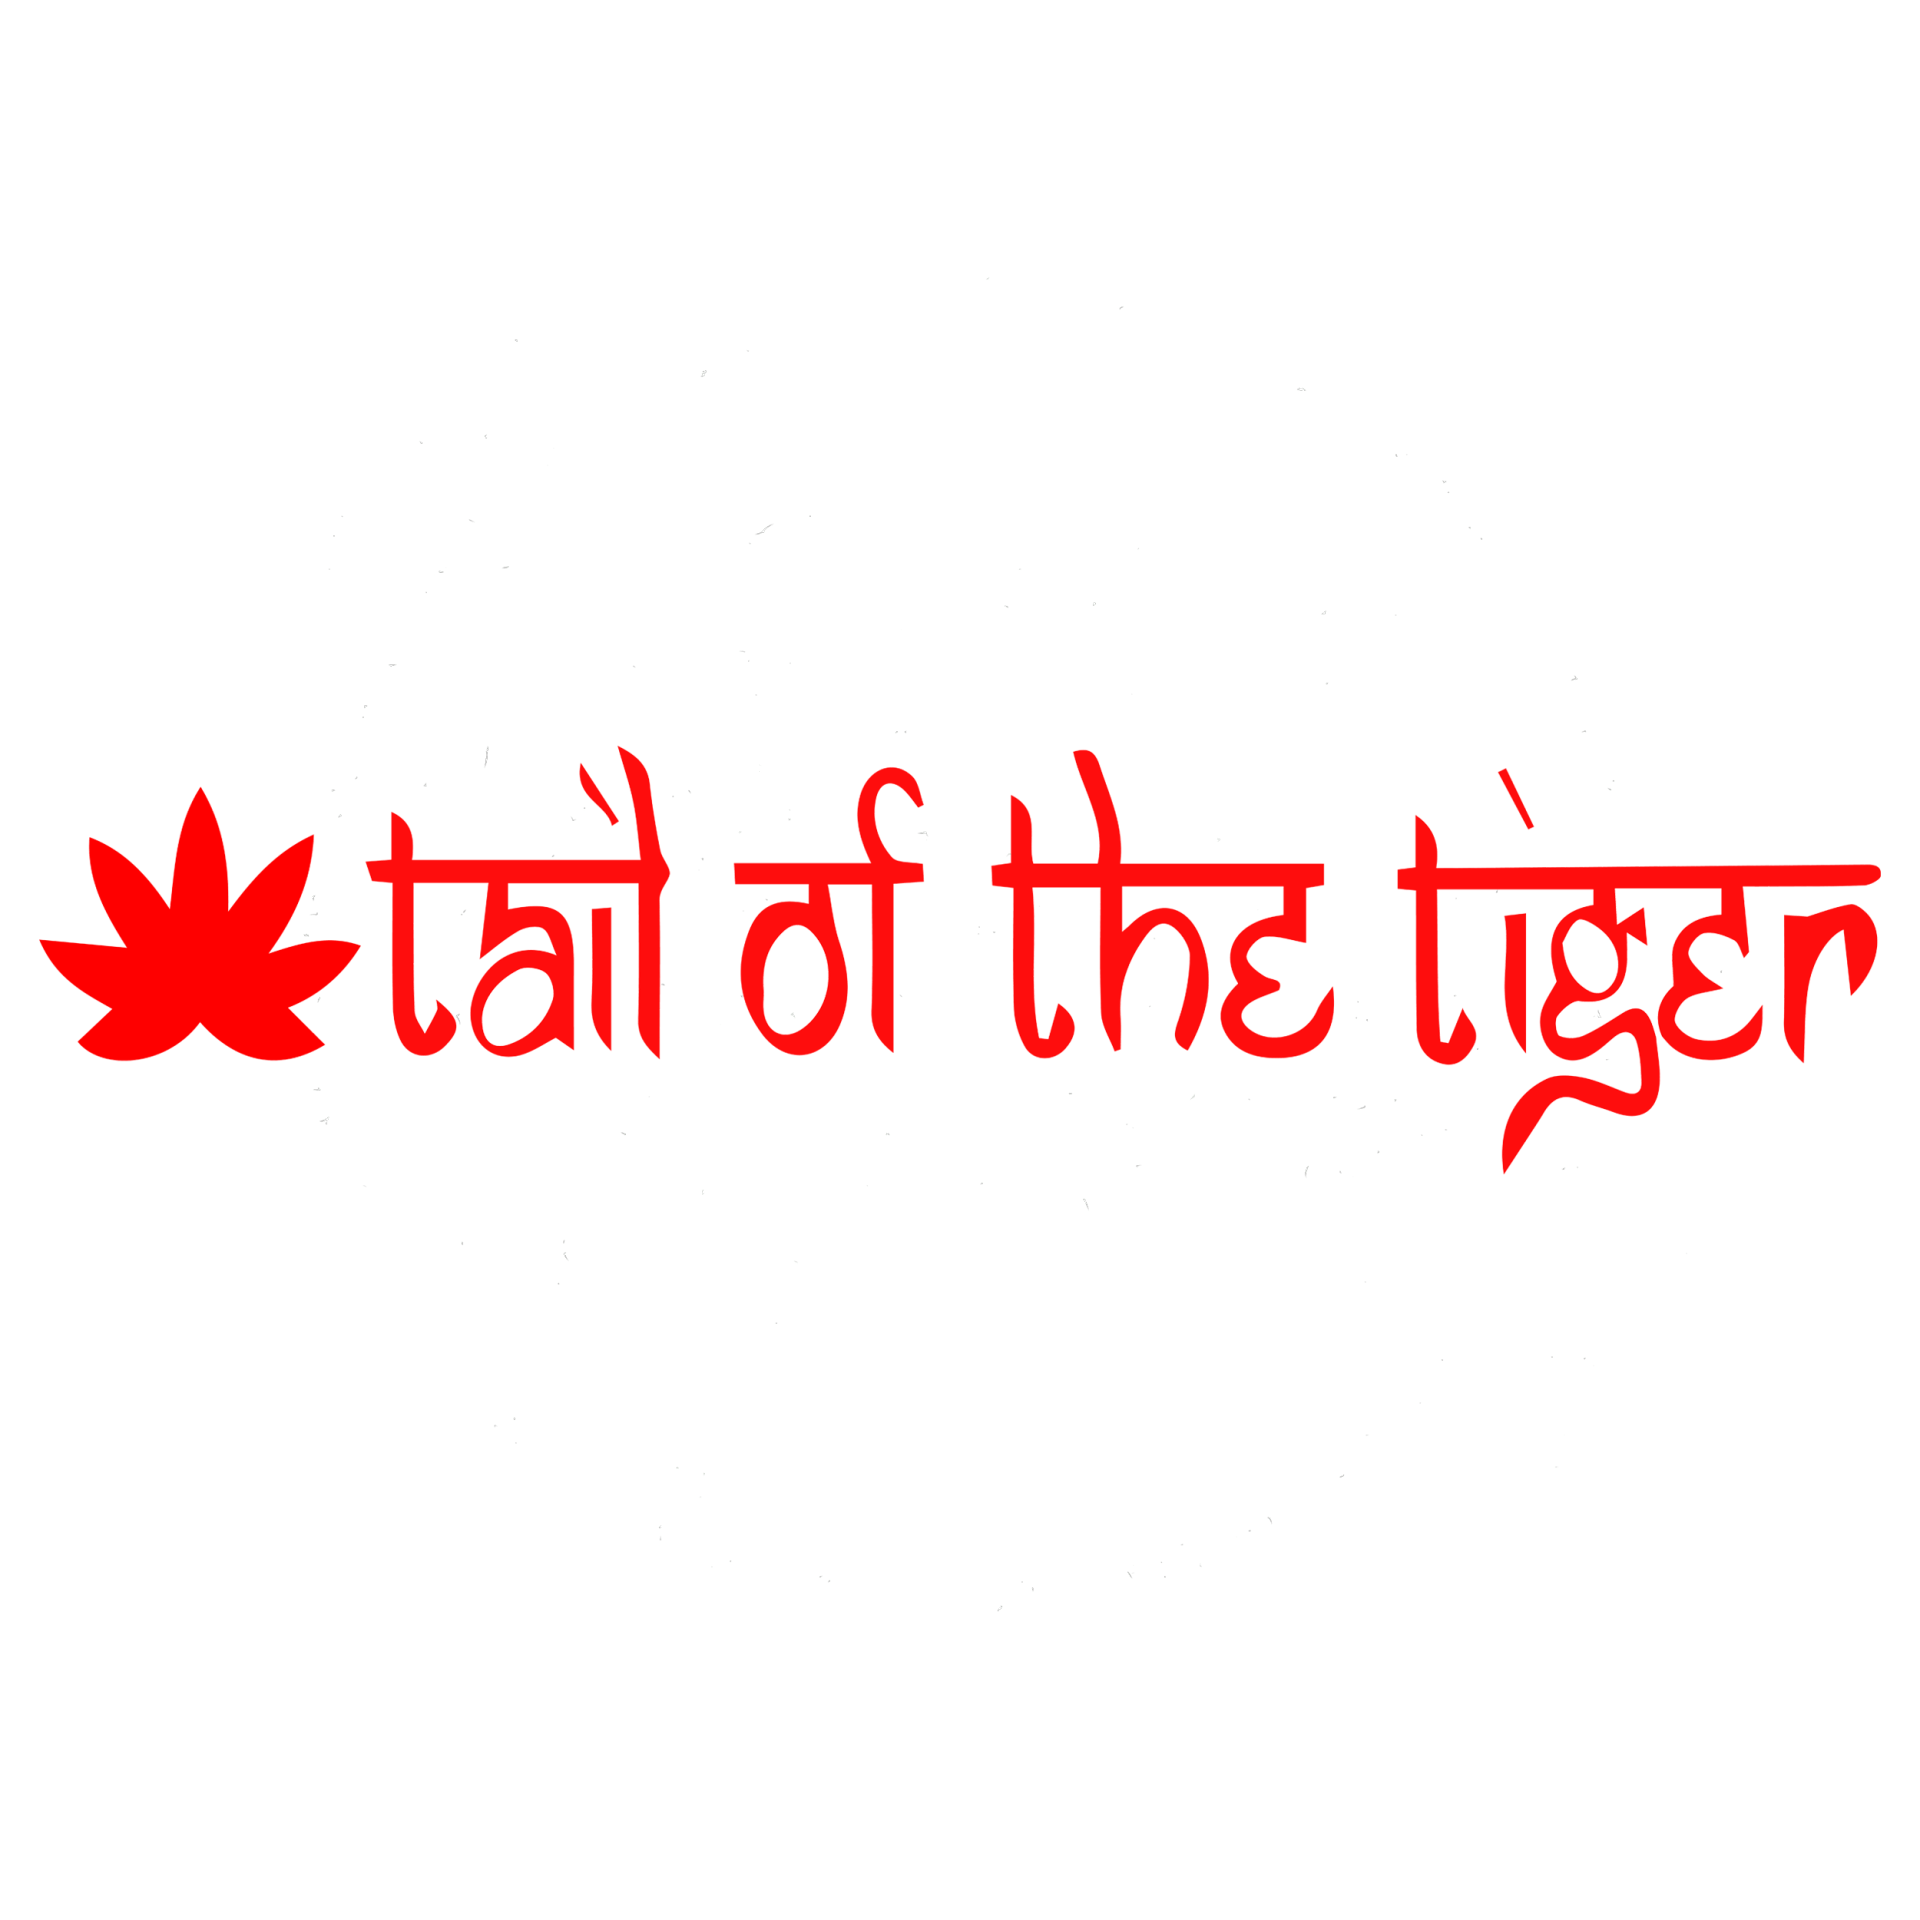 Tail of the Tiger